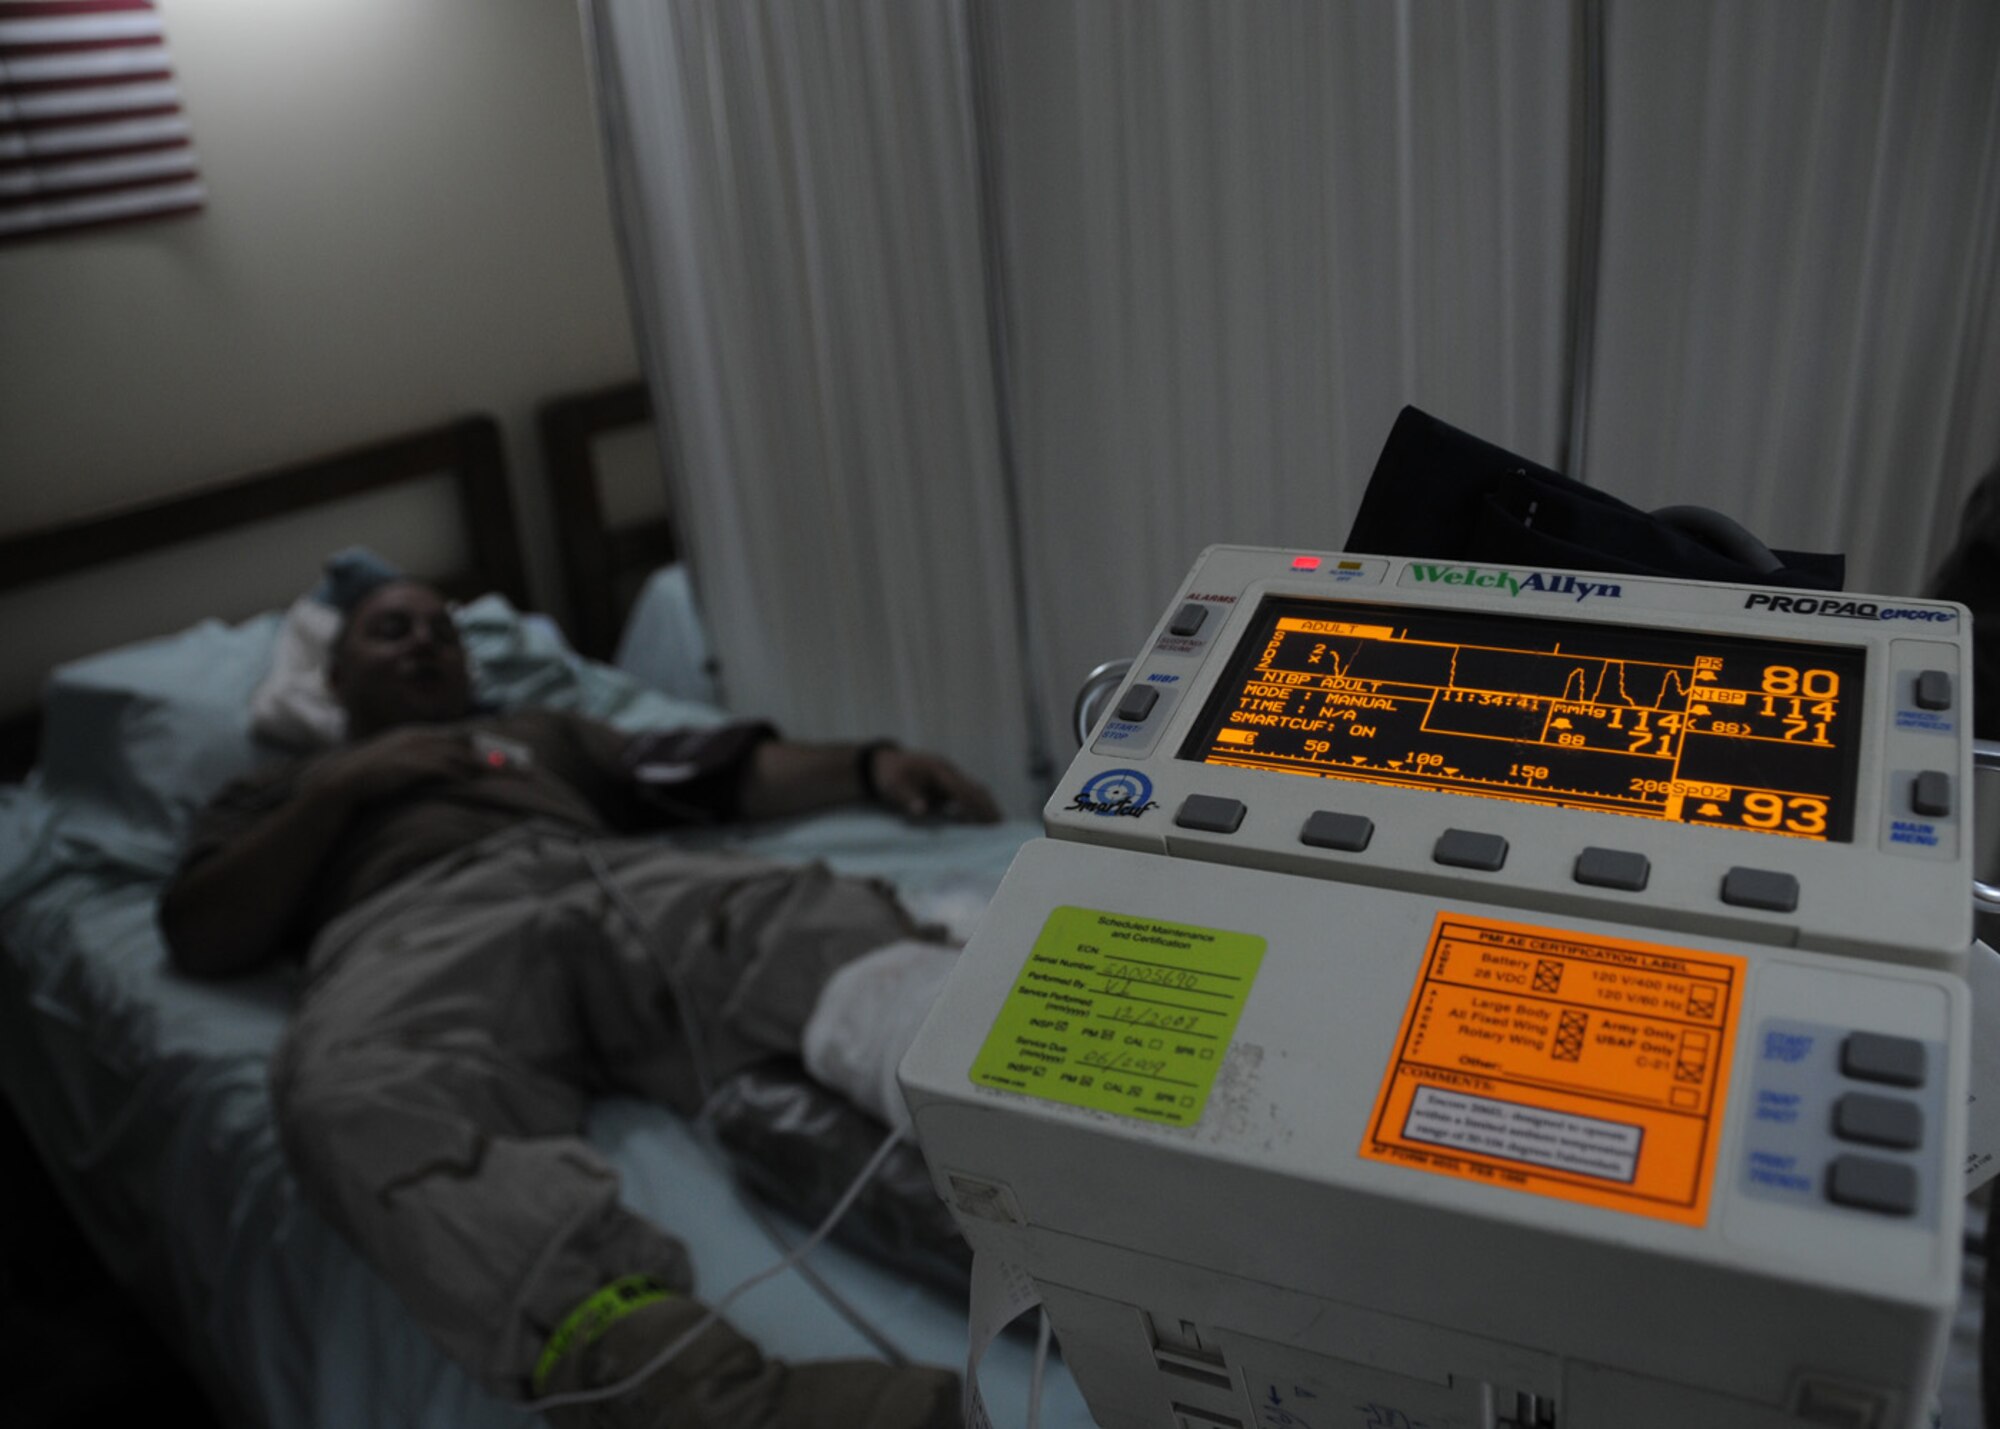 SOUTHWEST ASIA -- Senior Airman Richard Berni, 386th Expeditionary Civil Engineer Squadron simulated patient, rests and waits for his vital signs to be checked after being transferred from the initial scene during a Base Response and Readiness Exercise at an air base in Southwest Asia, April 13. In the event of an emergency, patients are assessed and treated by most critical patients first to minimal care. Airman Berni is currently deployed from Francis S. Gabreski Air National Guard base, N.Y., and is originally from Manorville, N.Y.  (U.S. Air Force photo/ Senior Airman Courtney Richardson)